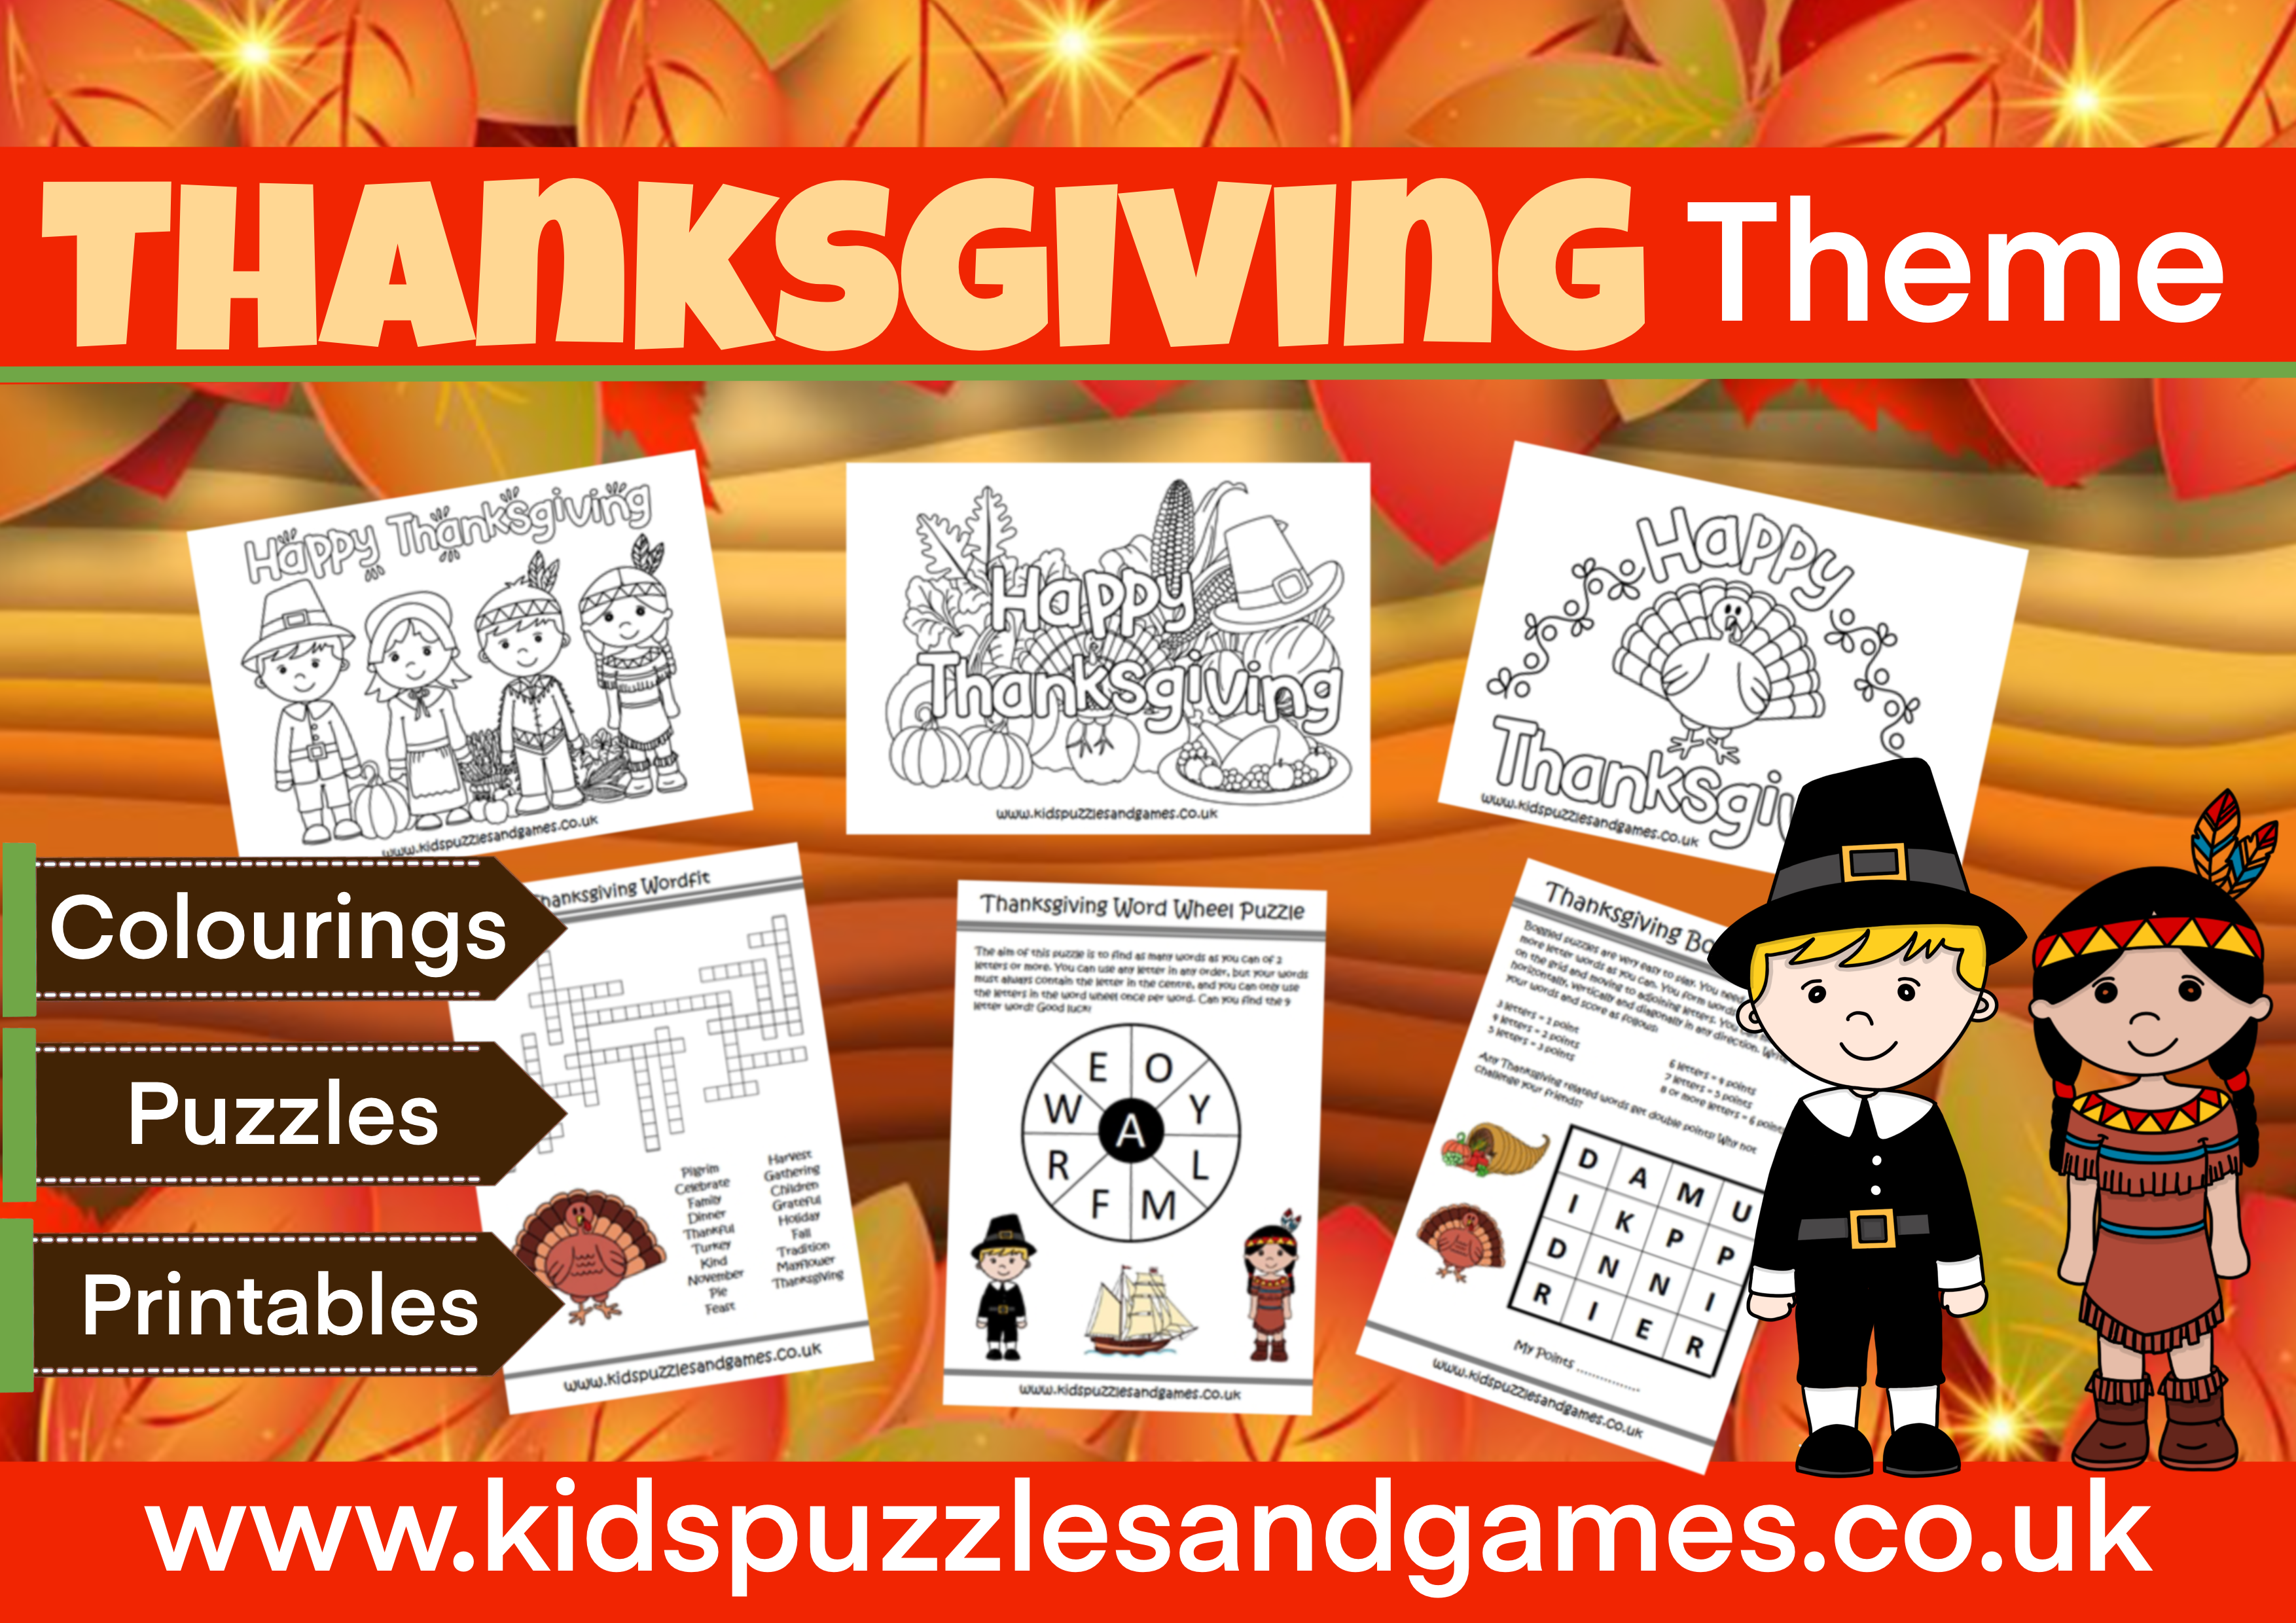 New Thanksgiving Pages Added